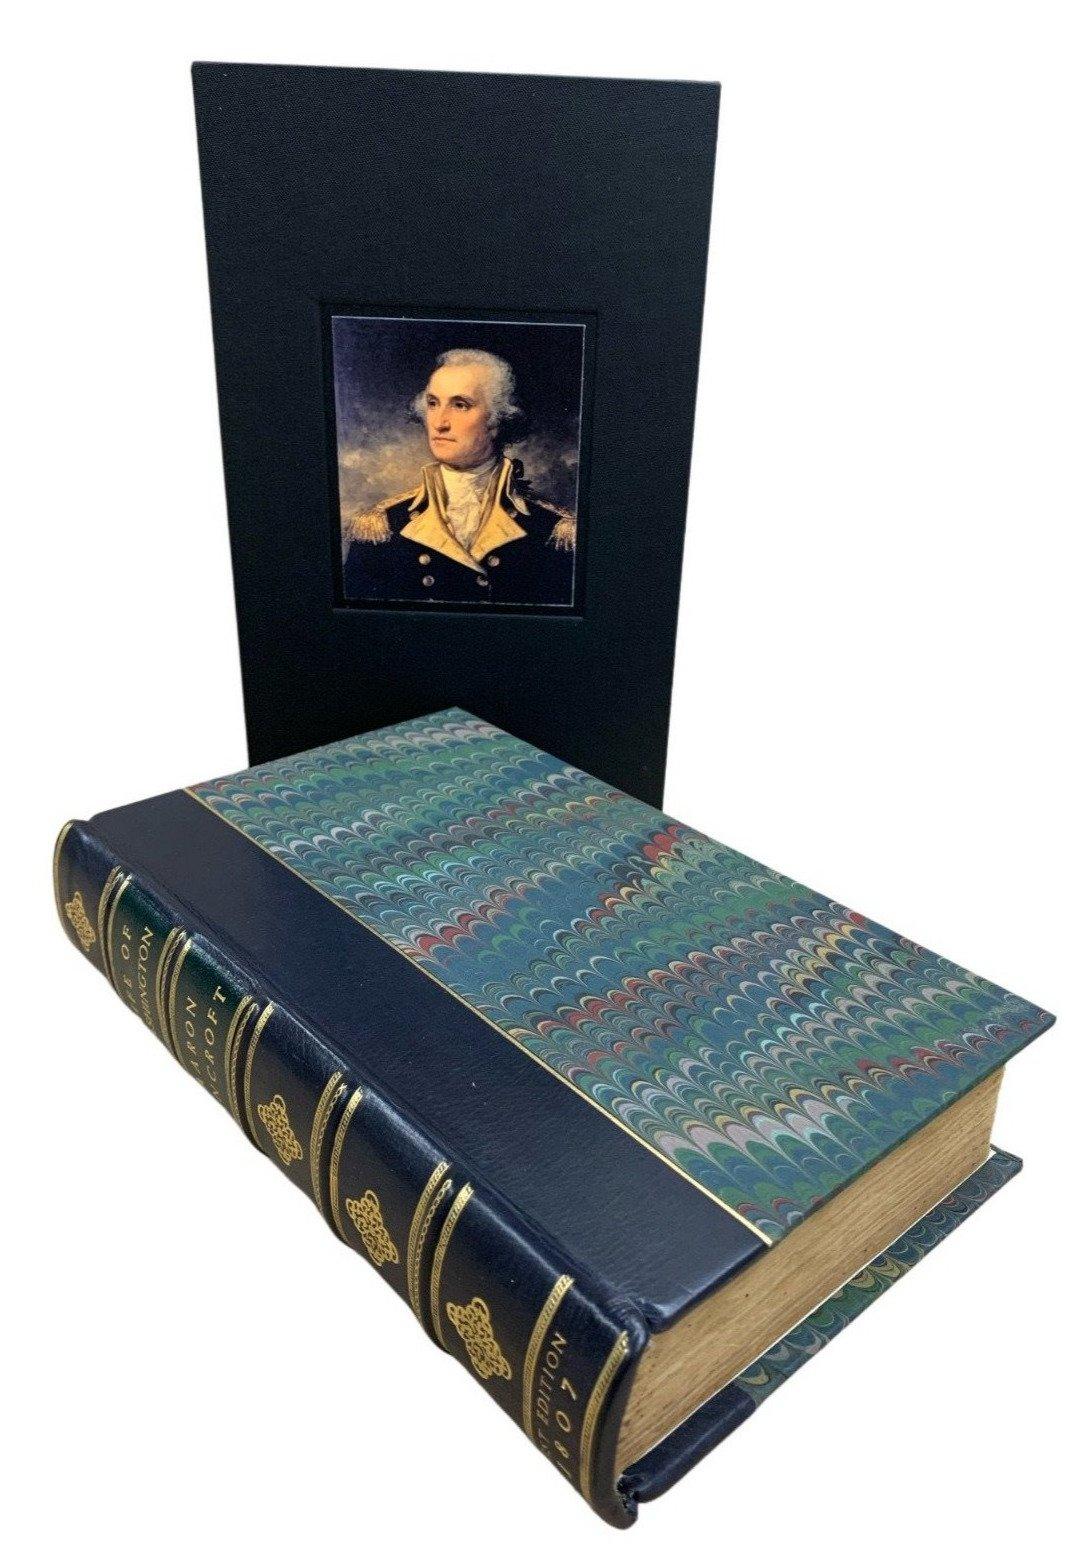 Bancroft, Aaron. An Essay on the Life of George Washington. Worcester: Thomas & Sturtevant, 1807. First edition, octovo. Bound in quarter calf leather with marbled boards and custom slipcase.

This is a stunning first edition of Aaron Bancroft’s